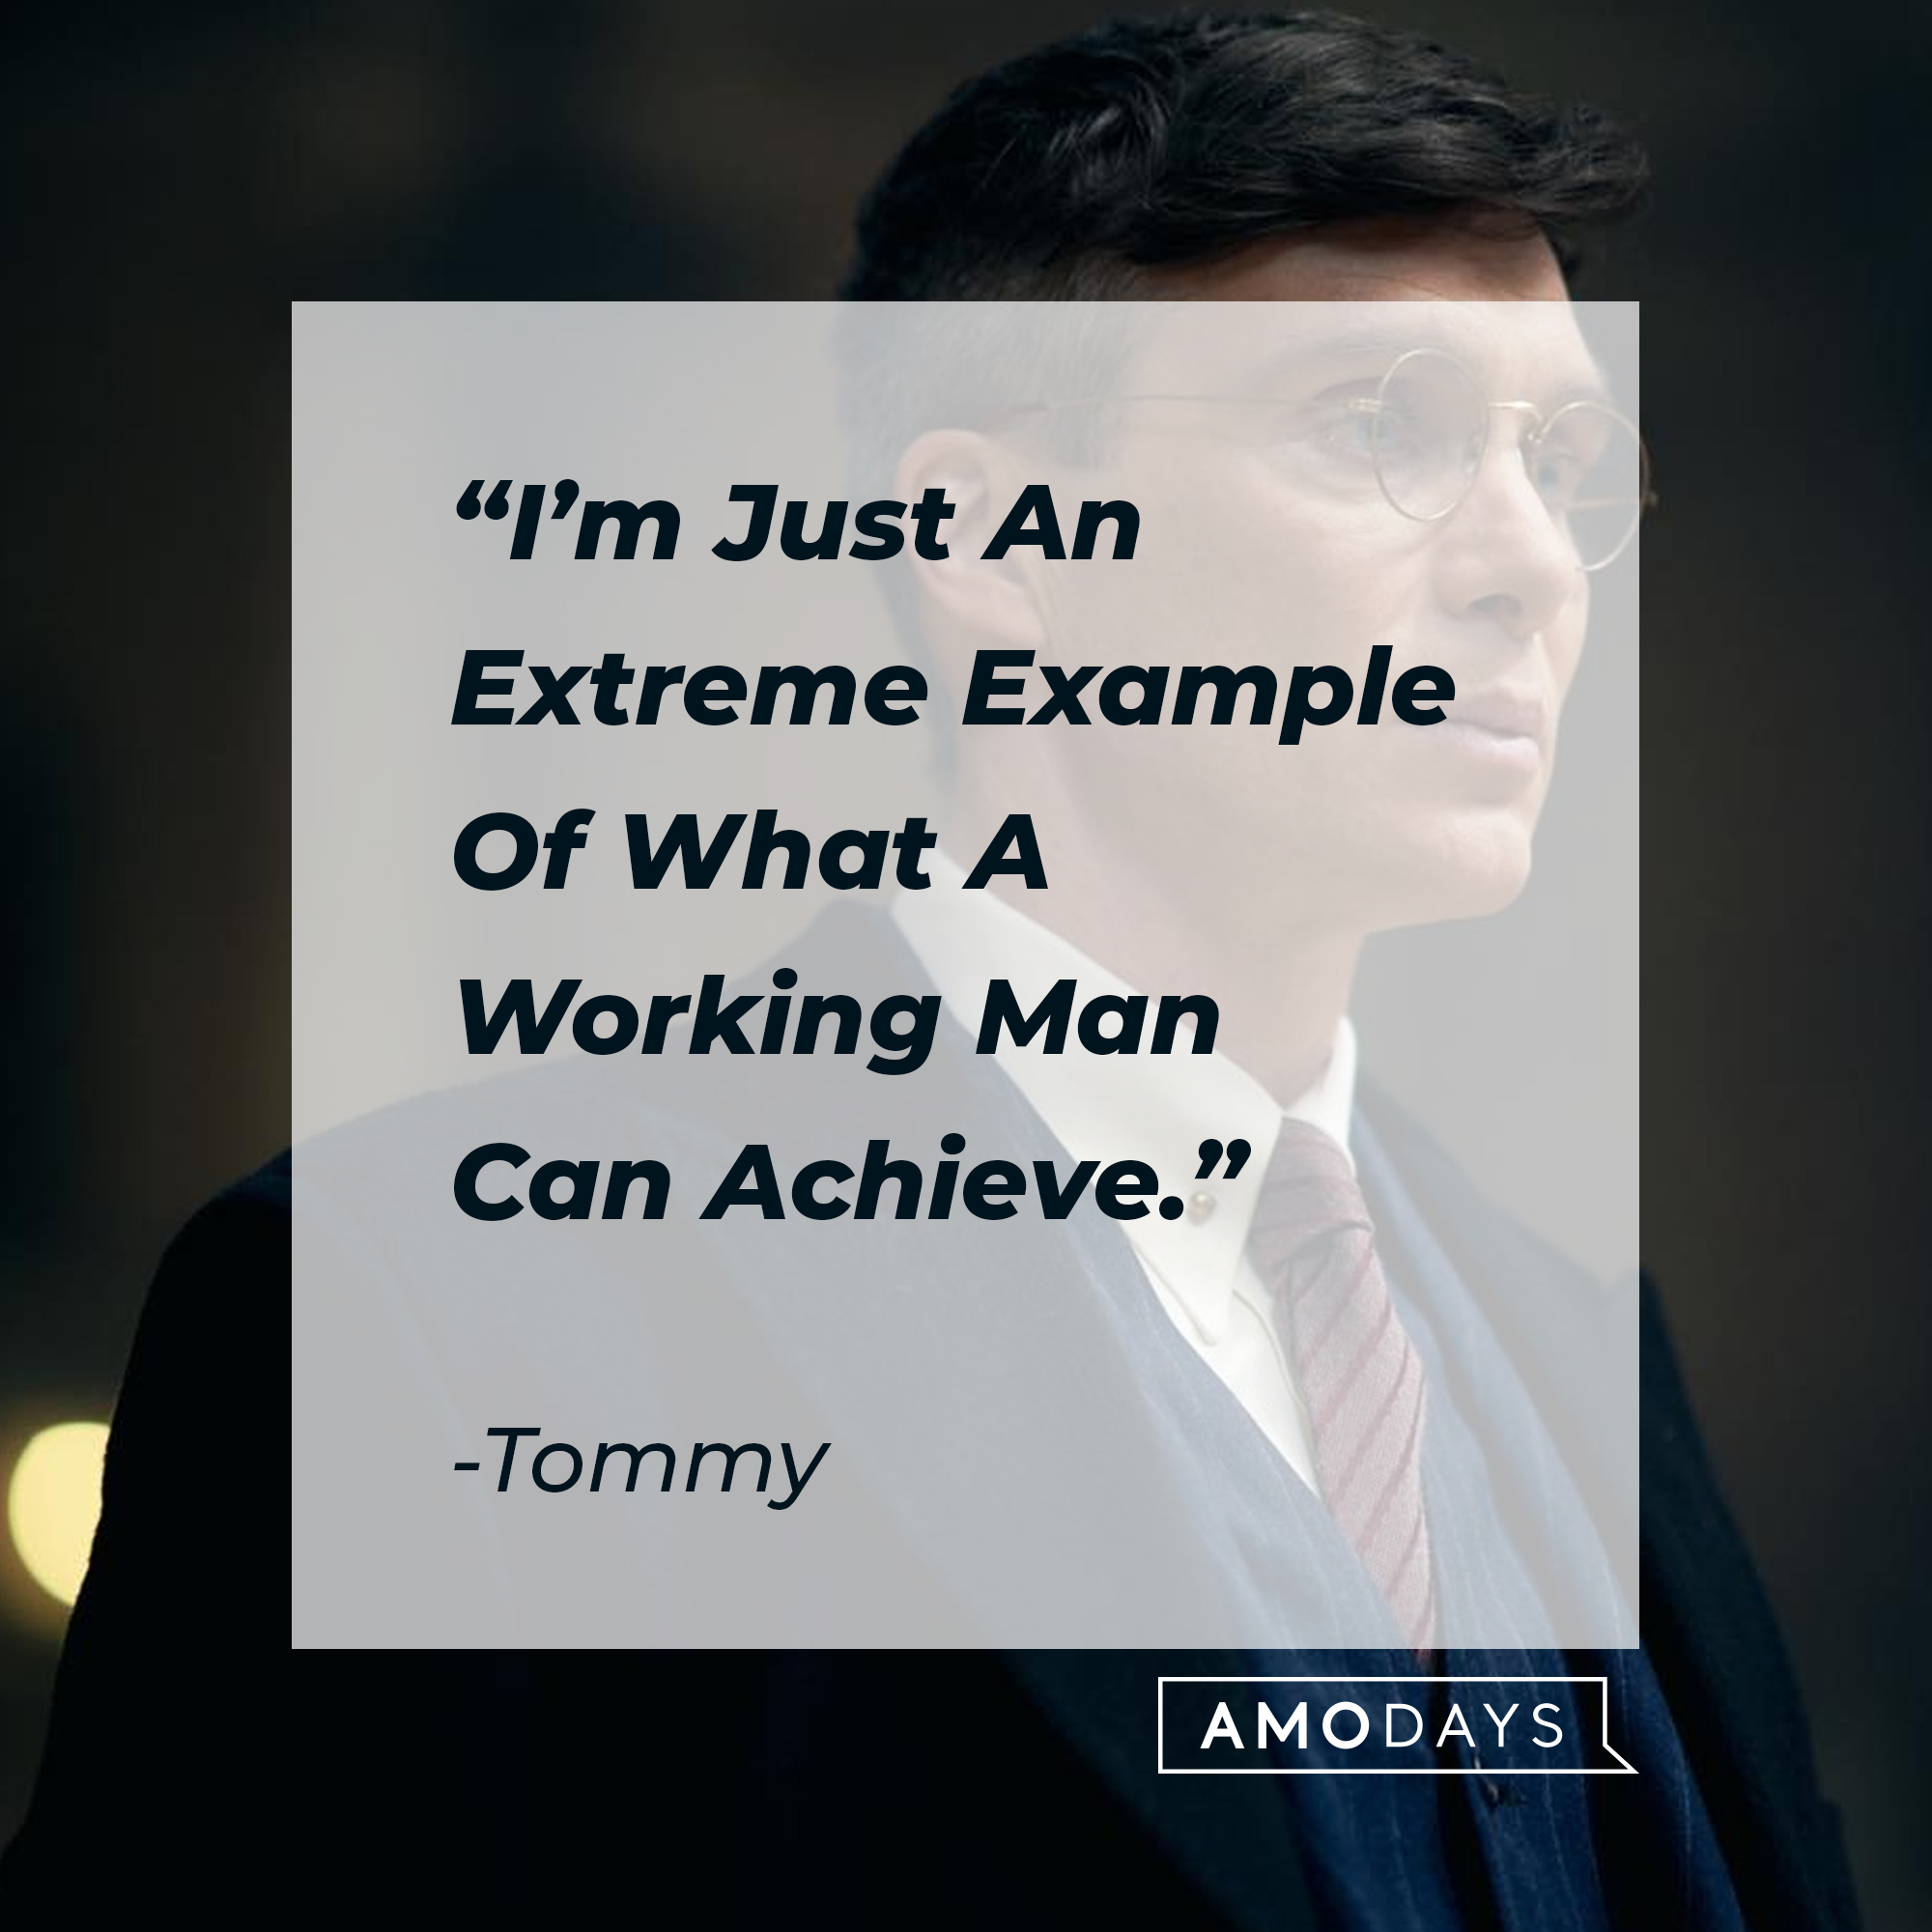 Tommy's quote: "I'm Just An Extreme Example Of What A Working Man Can Achieve."